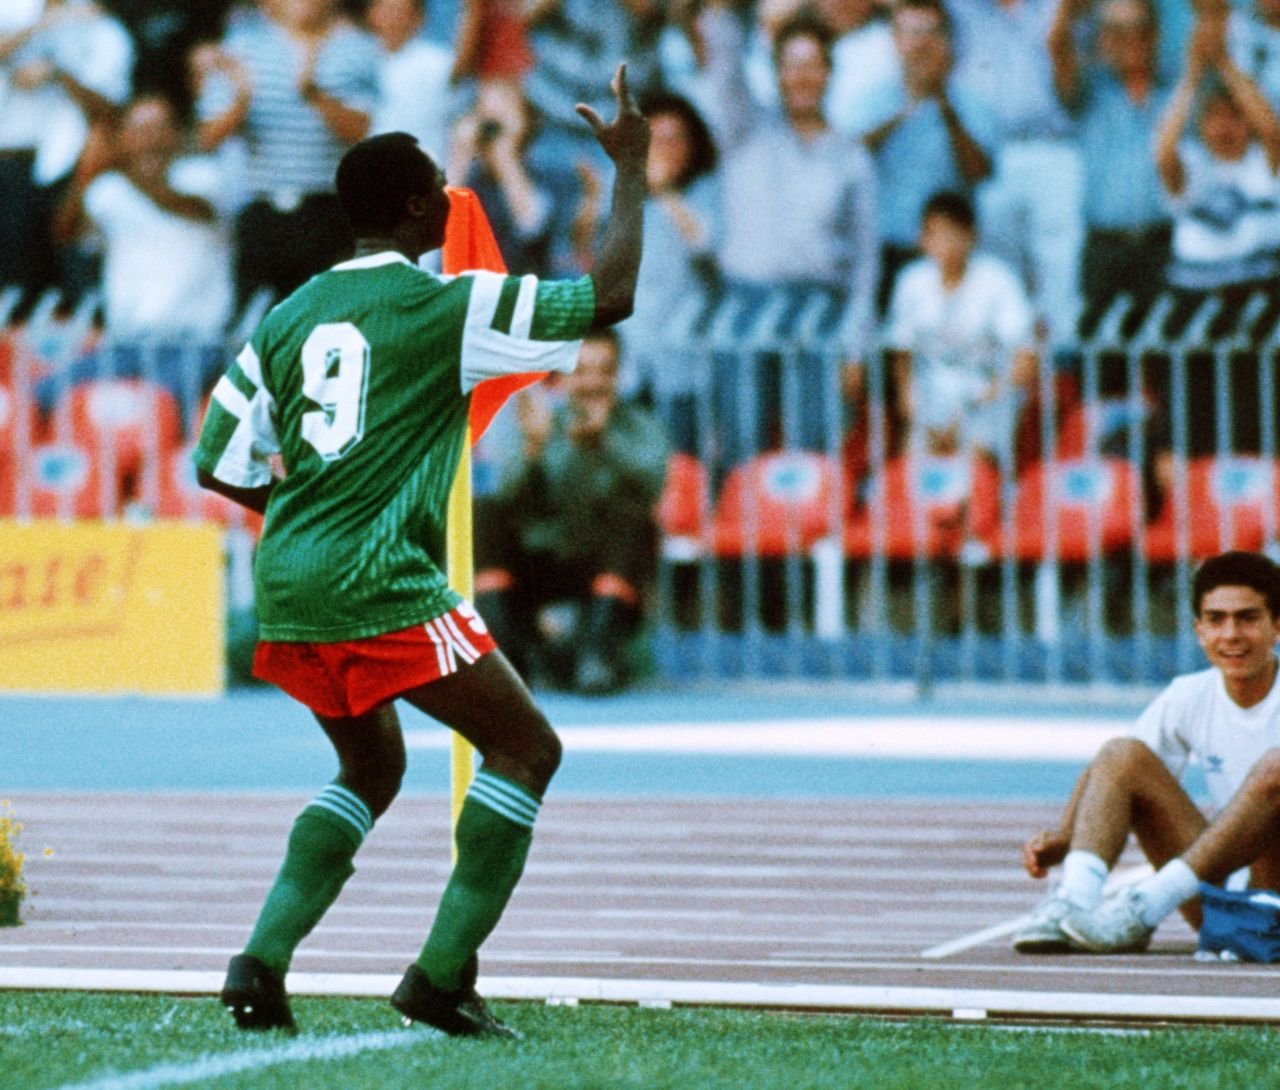 Roger Milla's famous corner flag celebration is seen after the first of his two goals against Colombia in the last 16 of the 1990 World Cup.